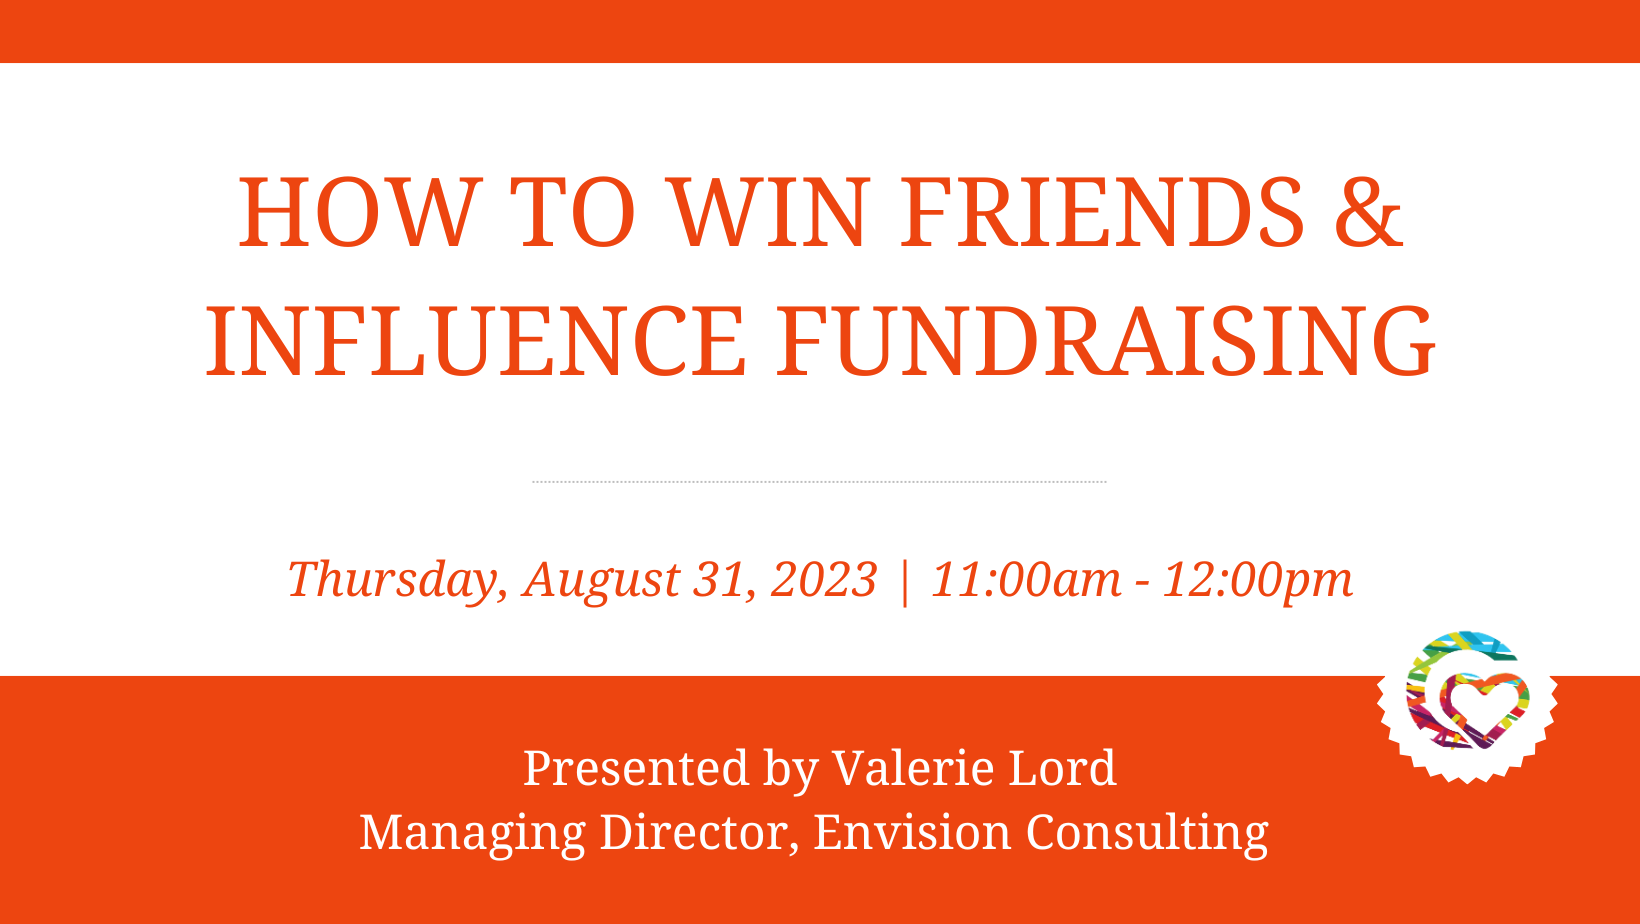 How to Win Friends & Influence Fundraising